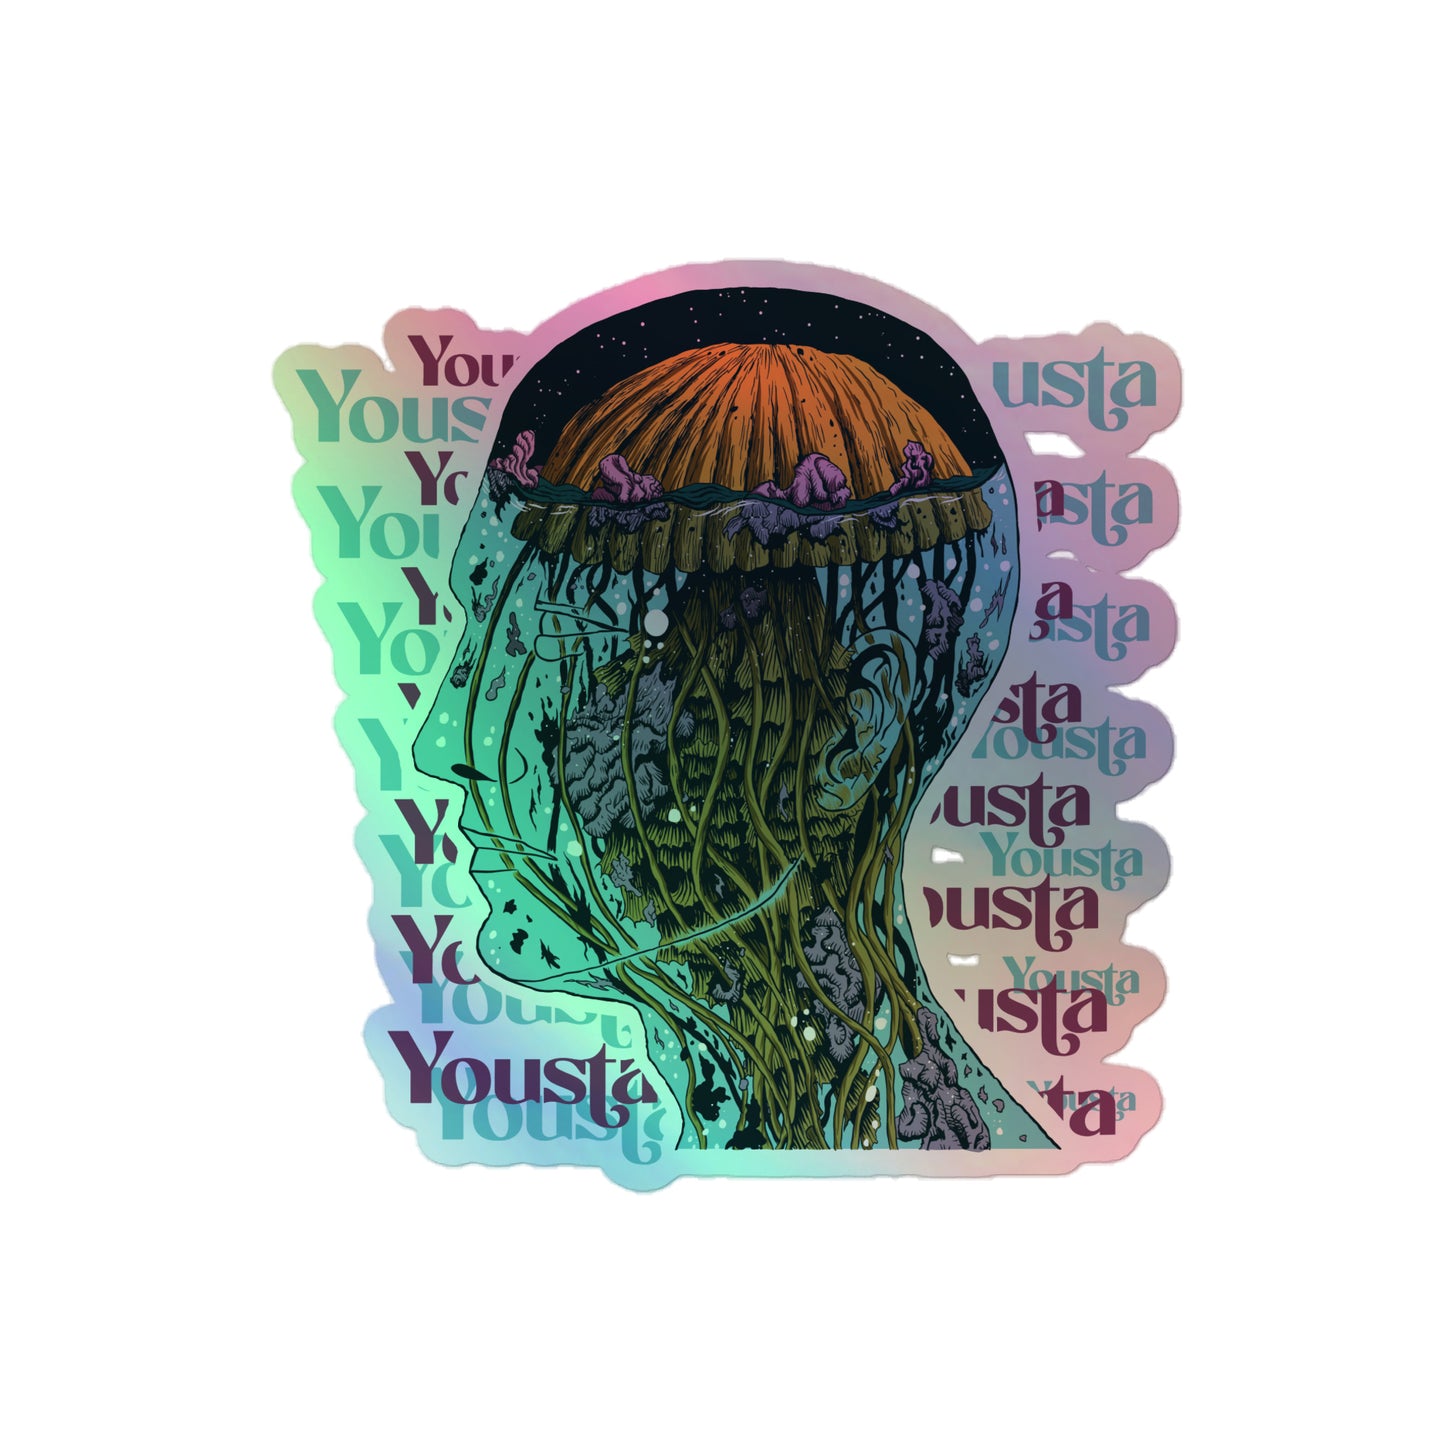 Aquarian Insight Holographic stickers